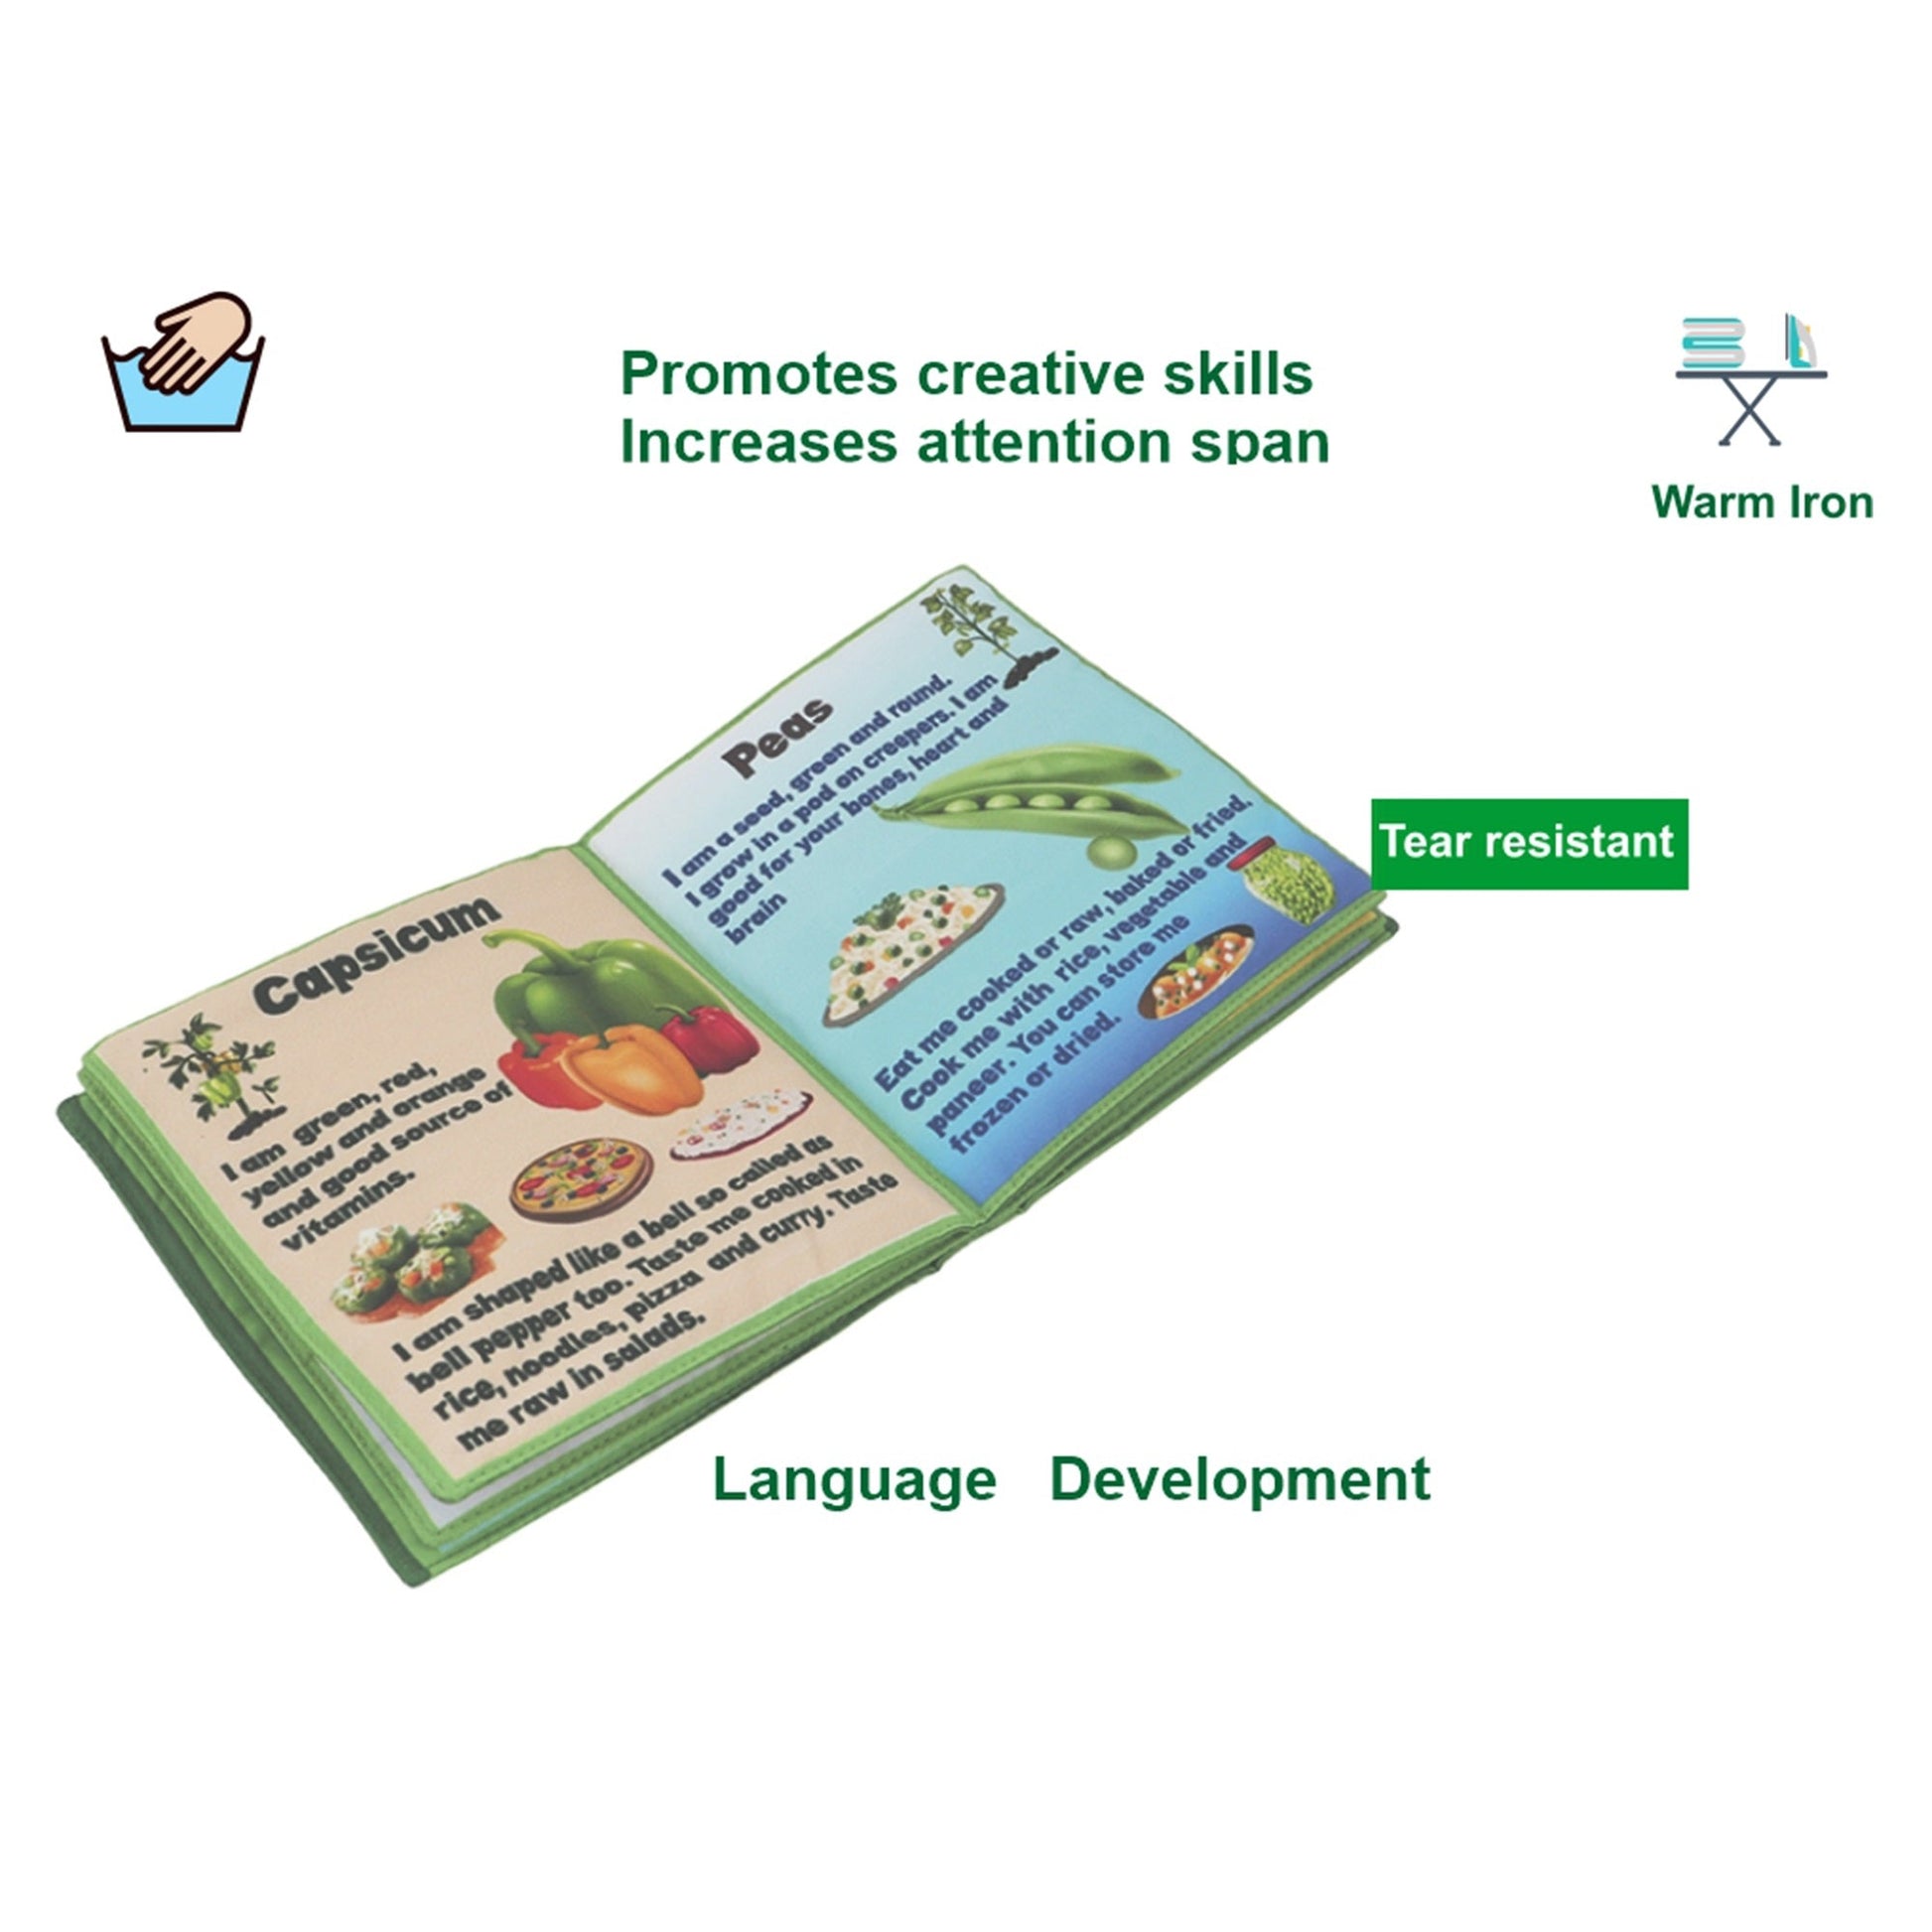 Buy Our Health Friend Vegetables Cloth Book English For Kids - SkilloToys.com